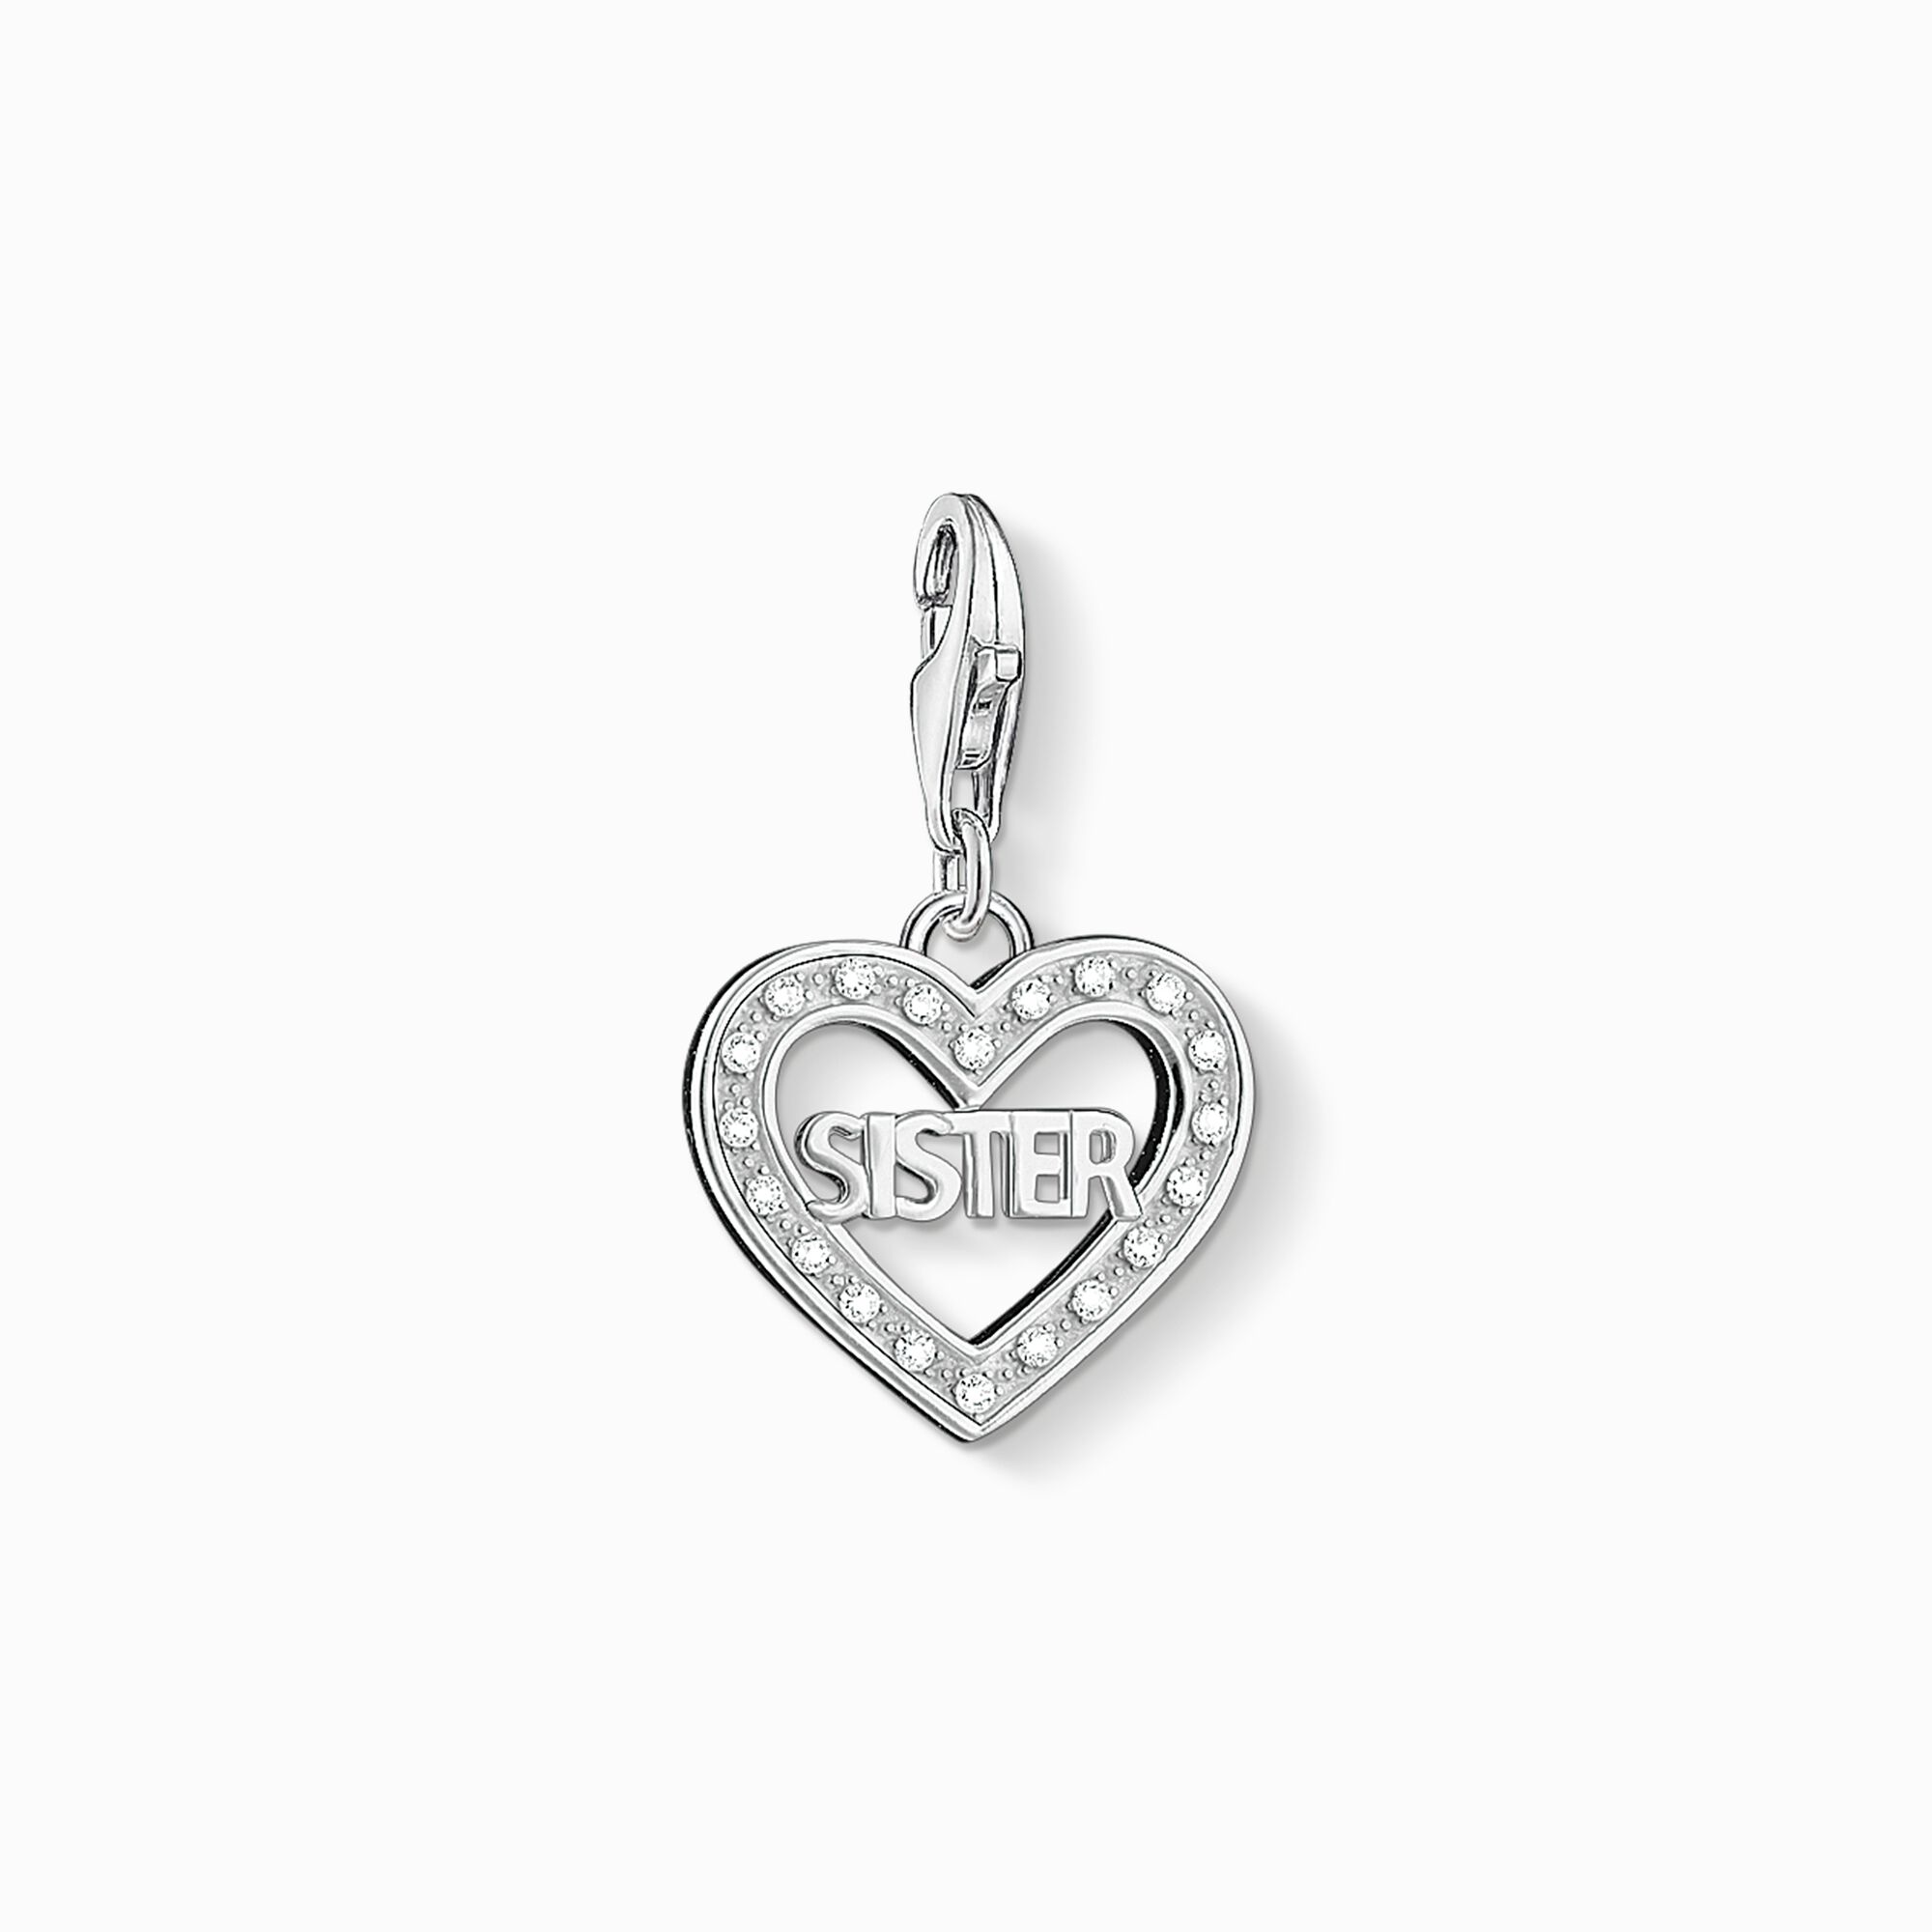 Charm pendant SISTER from the Charm Club collection in the THOMAS SABO online store